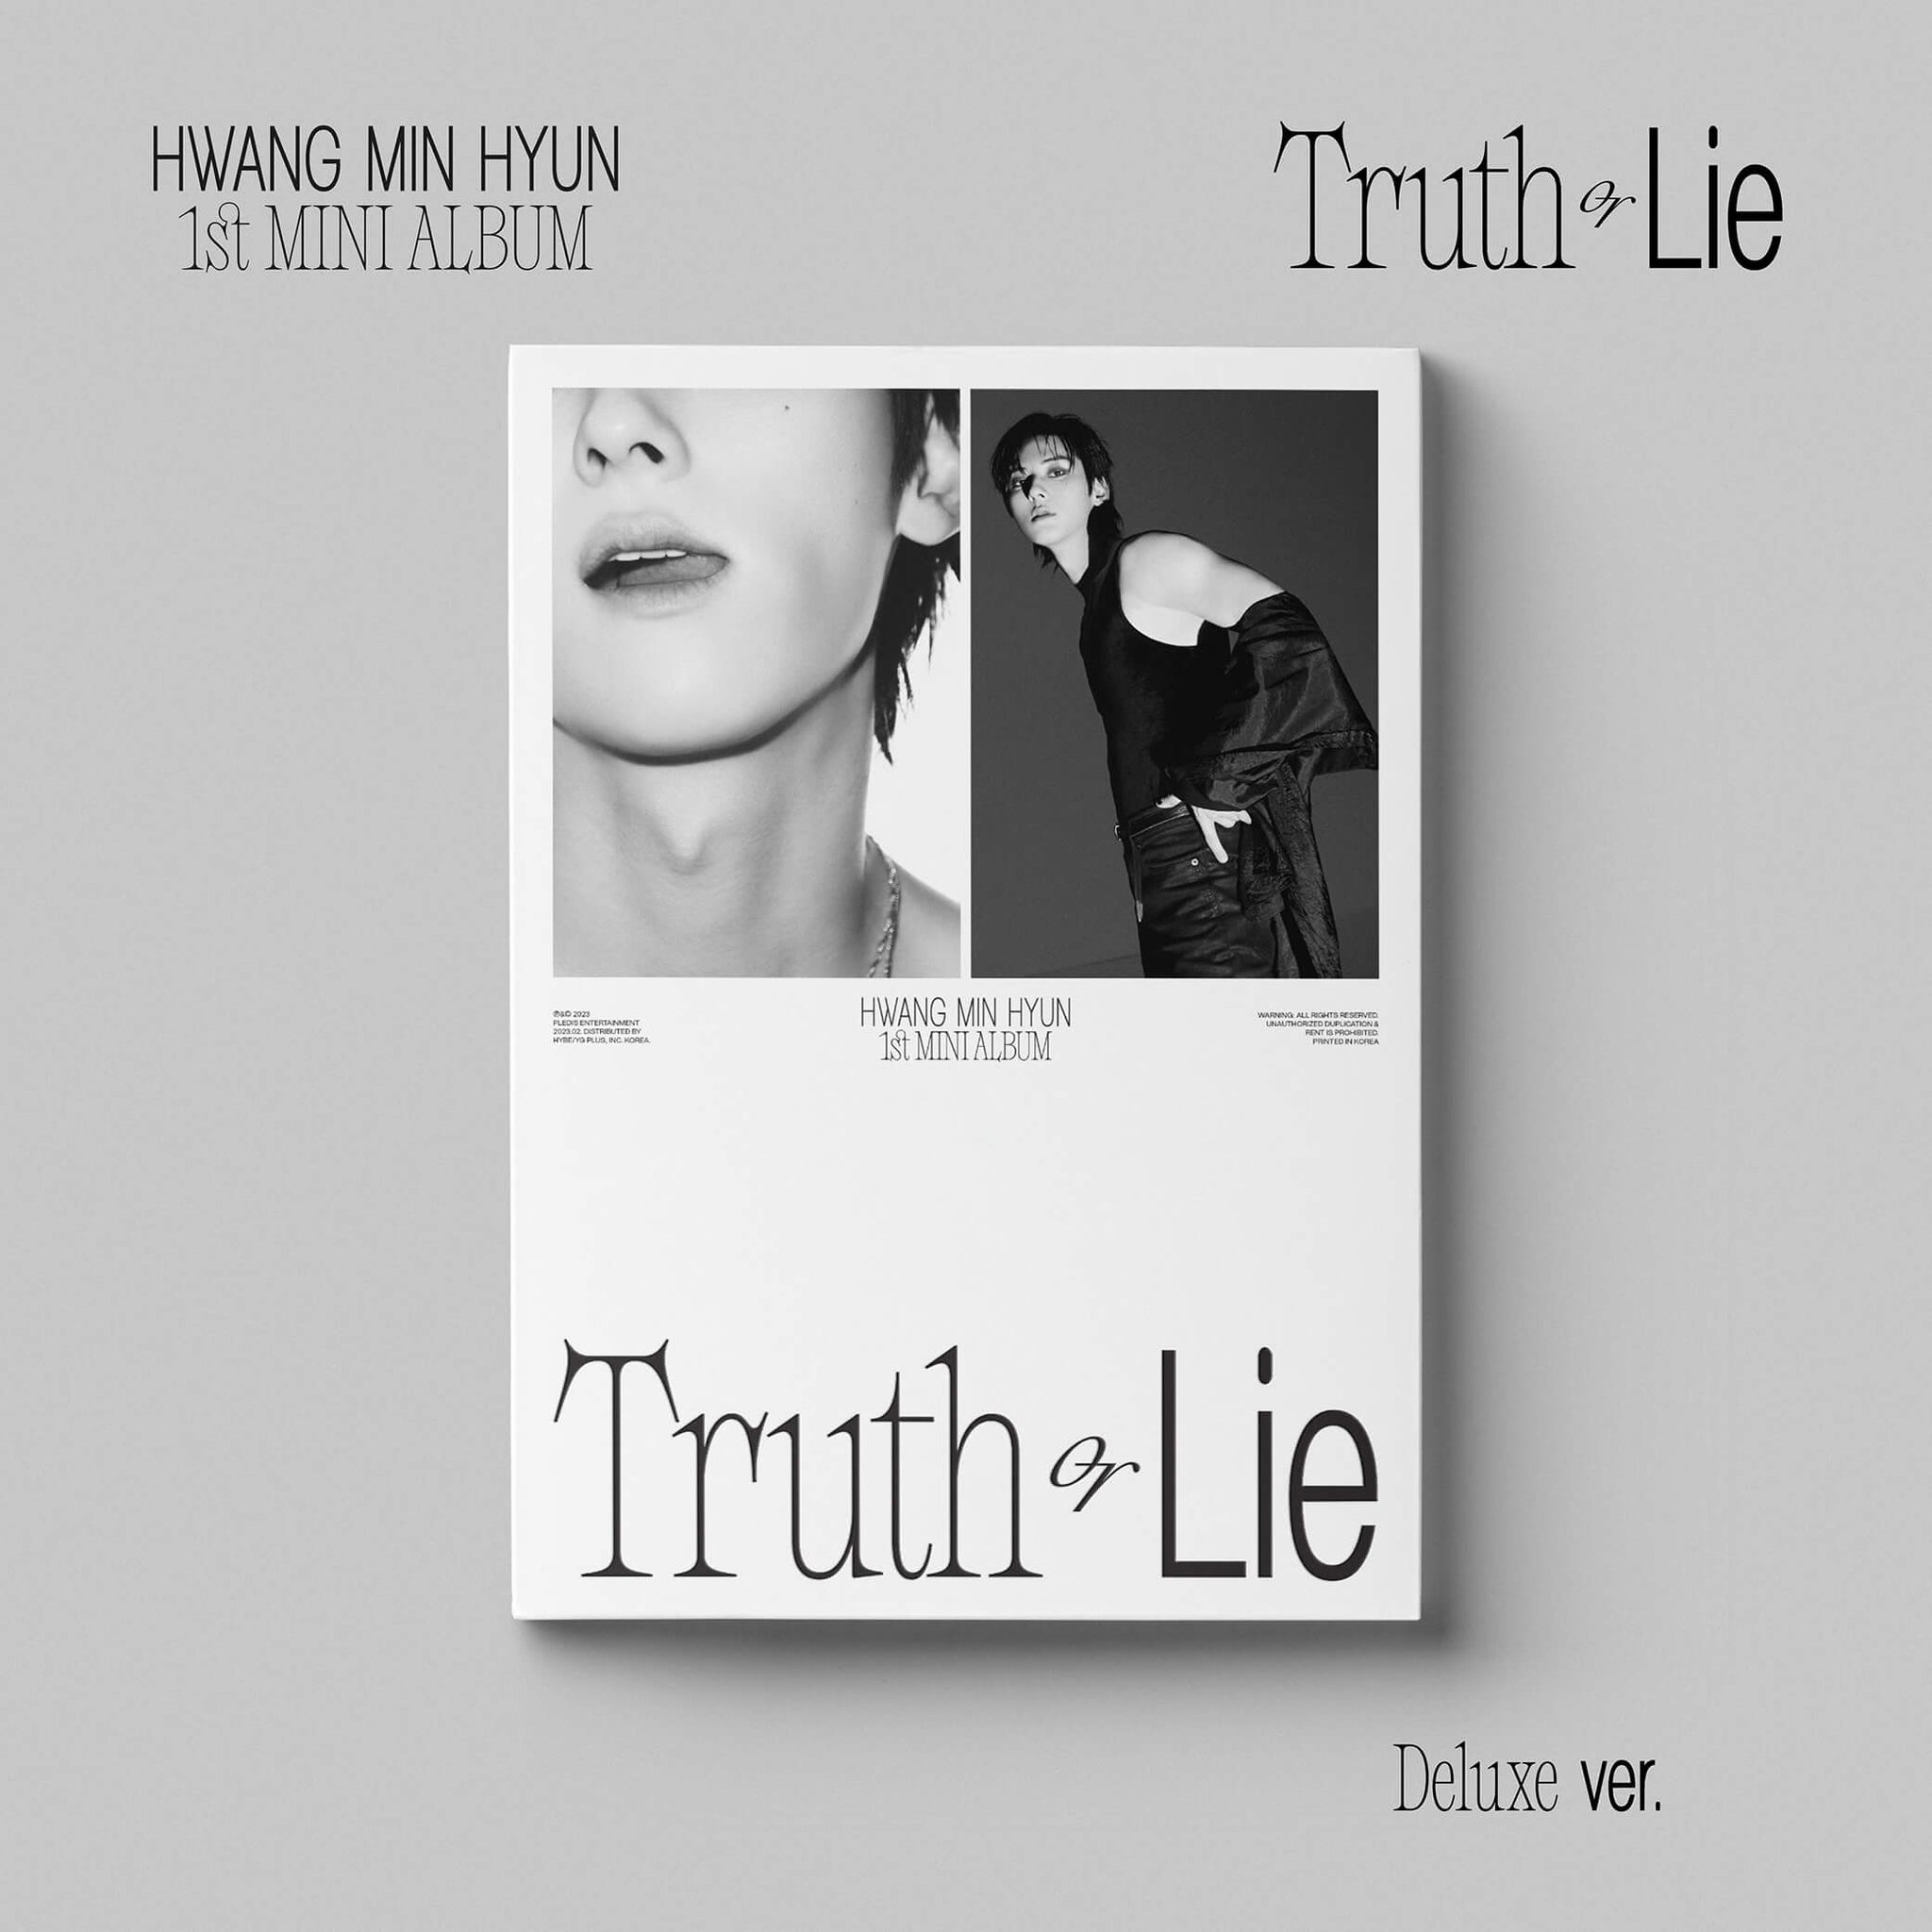 Hwang Min Hyun - Truth or Lie (Deluxe Version)